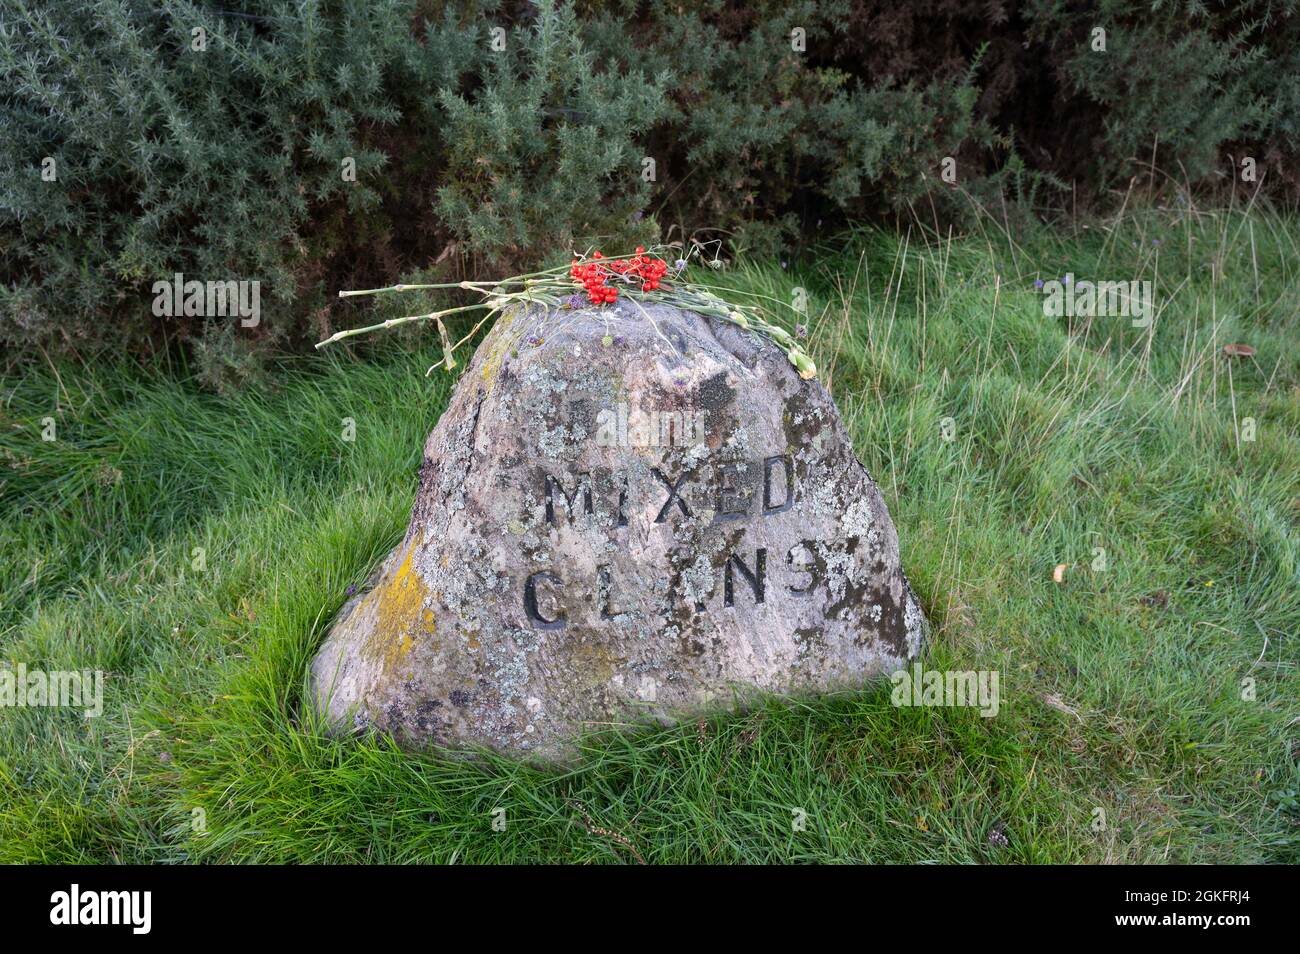 Culloden battlefield in Scotland. Isolated headstone for Mixed Clans with background of grass and other greenery. Stock Photo